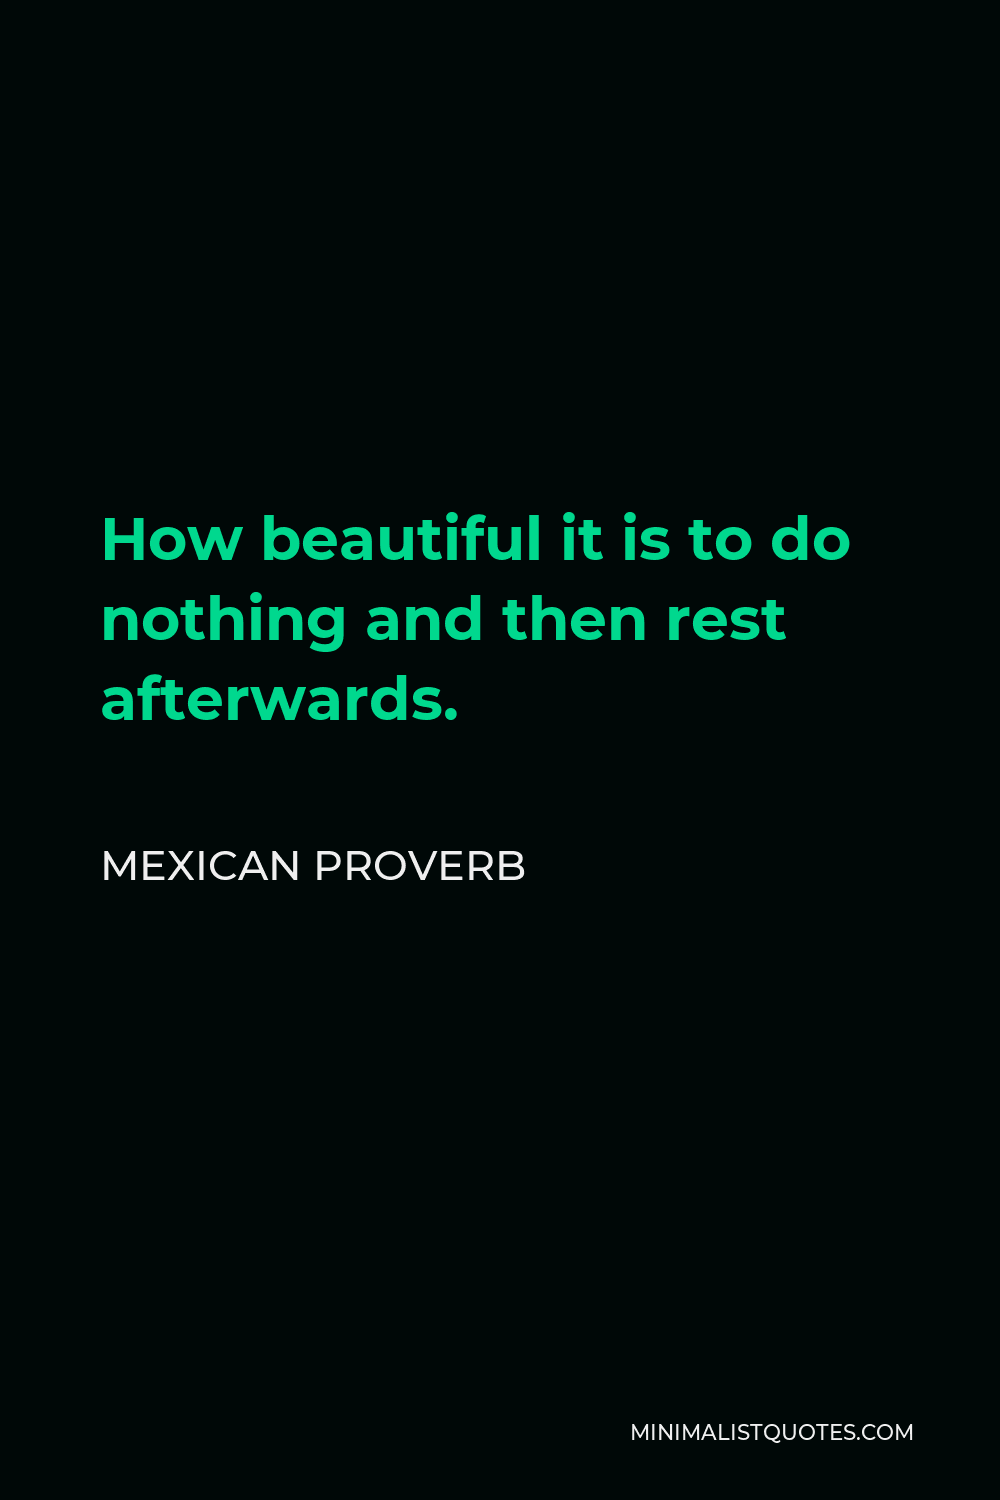 Mexican Proverb Quote - How beautiful it is to do nothing and then rest afterwards.